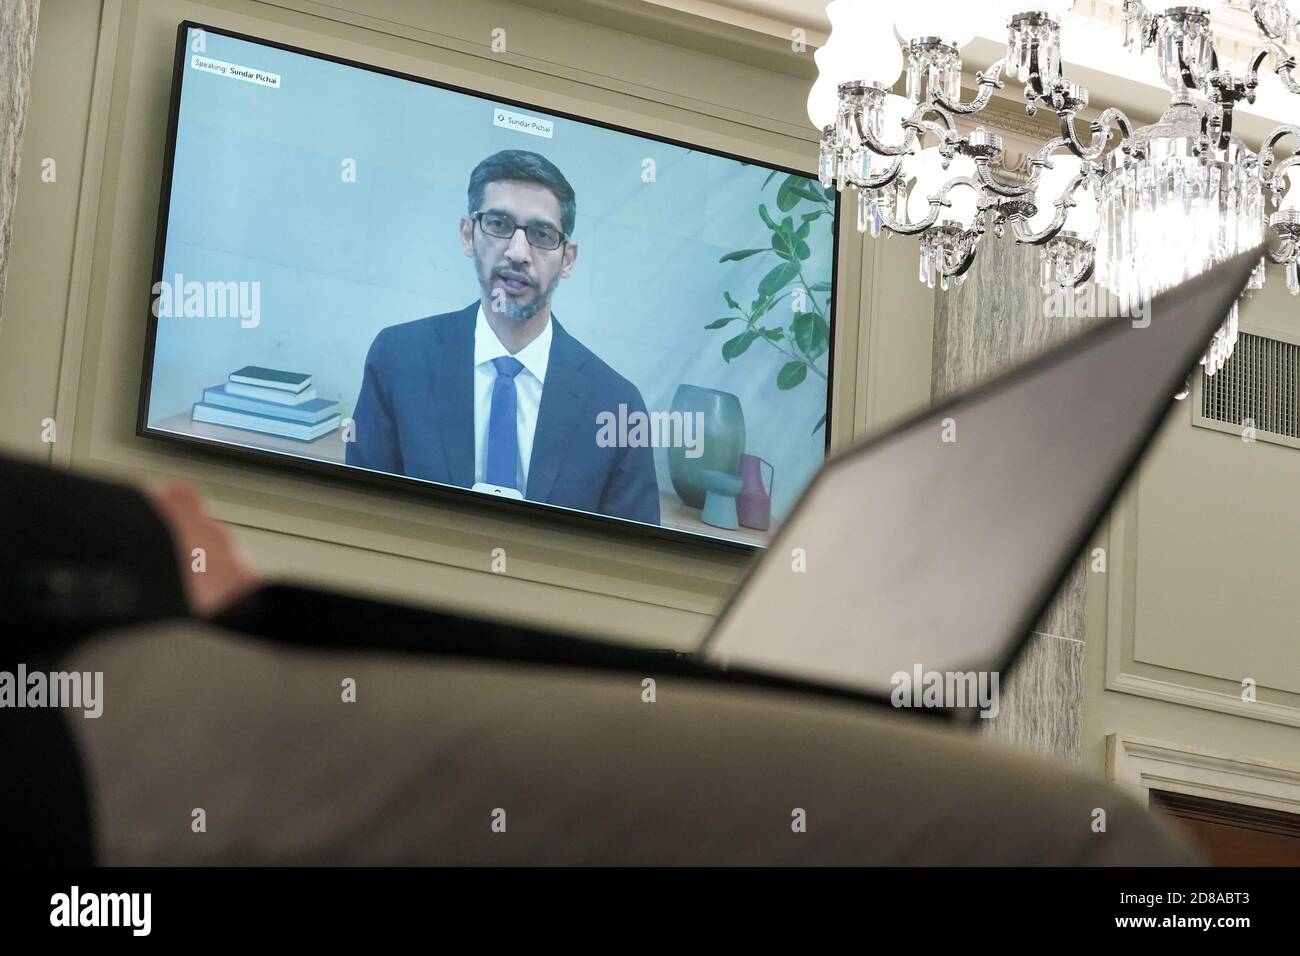 Washington, United States. 28th Oct, 2020. Google CEO Sundar Pichai testifies remotely at a hearing to discuss reforming Section 230 of the Communications Decency Act with big tech companies on Wednesday, October 28, in Washington, DC. Pool Photo by Greg Nash/UPI Credit: UPI/Alamy Live News Stock Photo